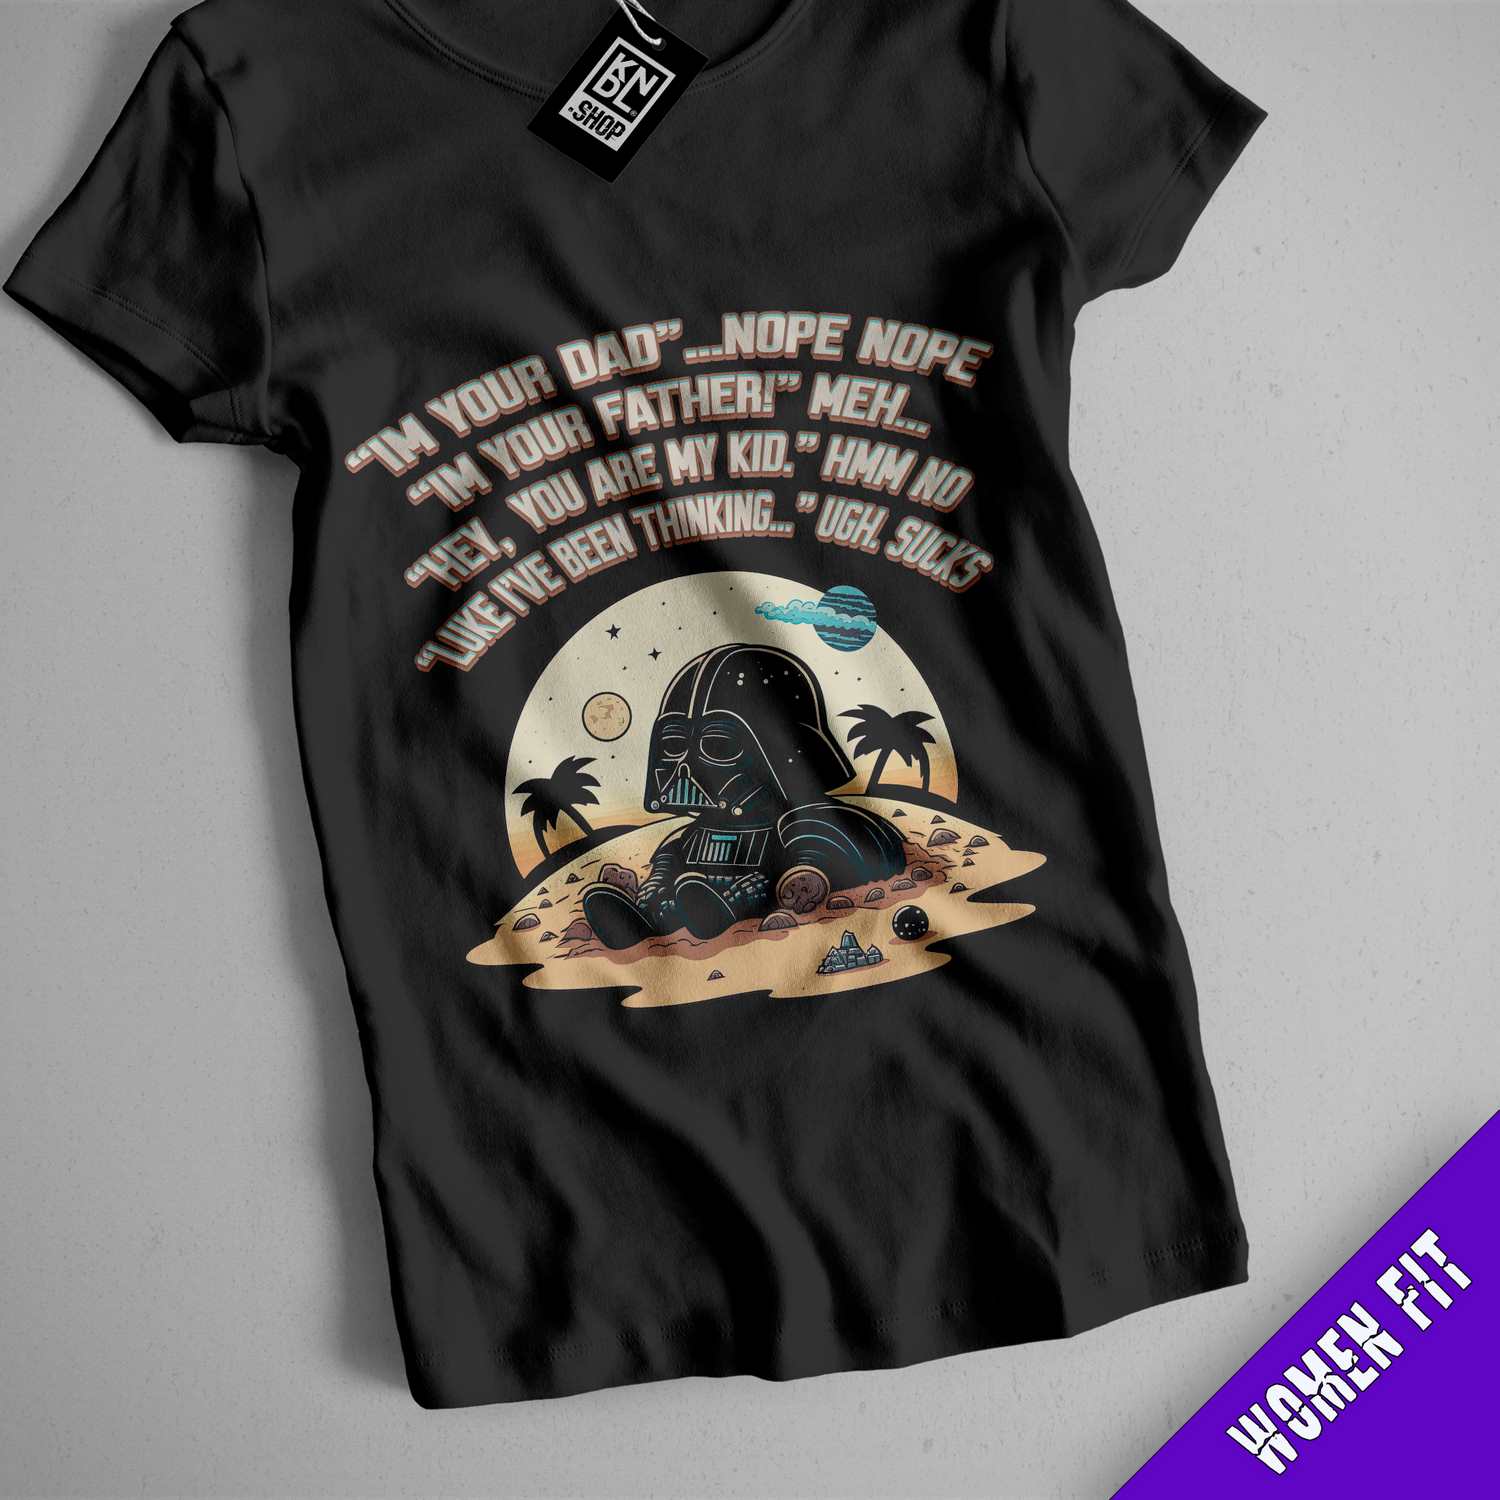 a star wars shirt with a darth vader quote